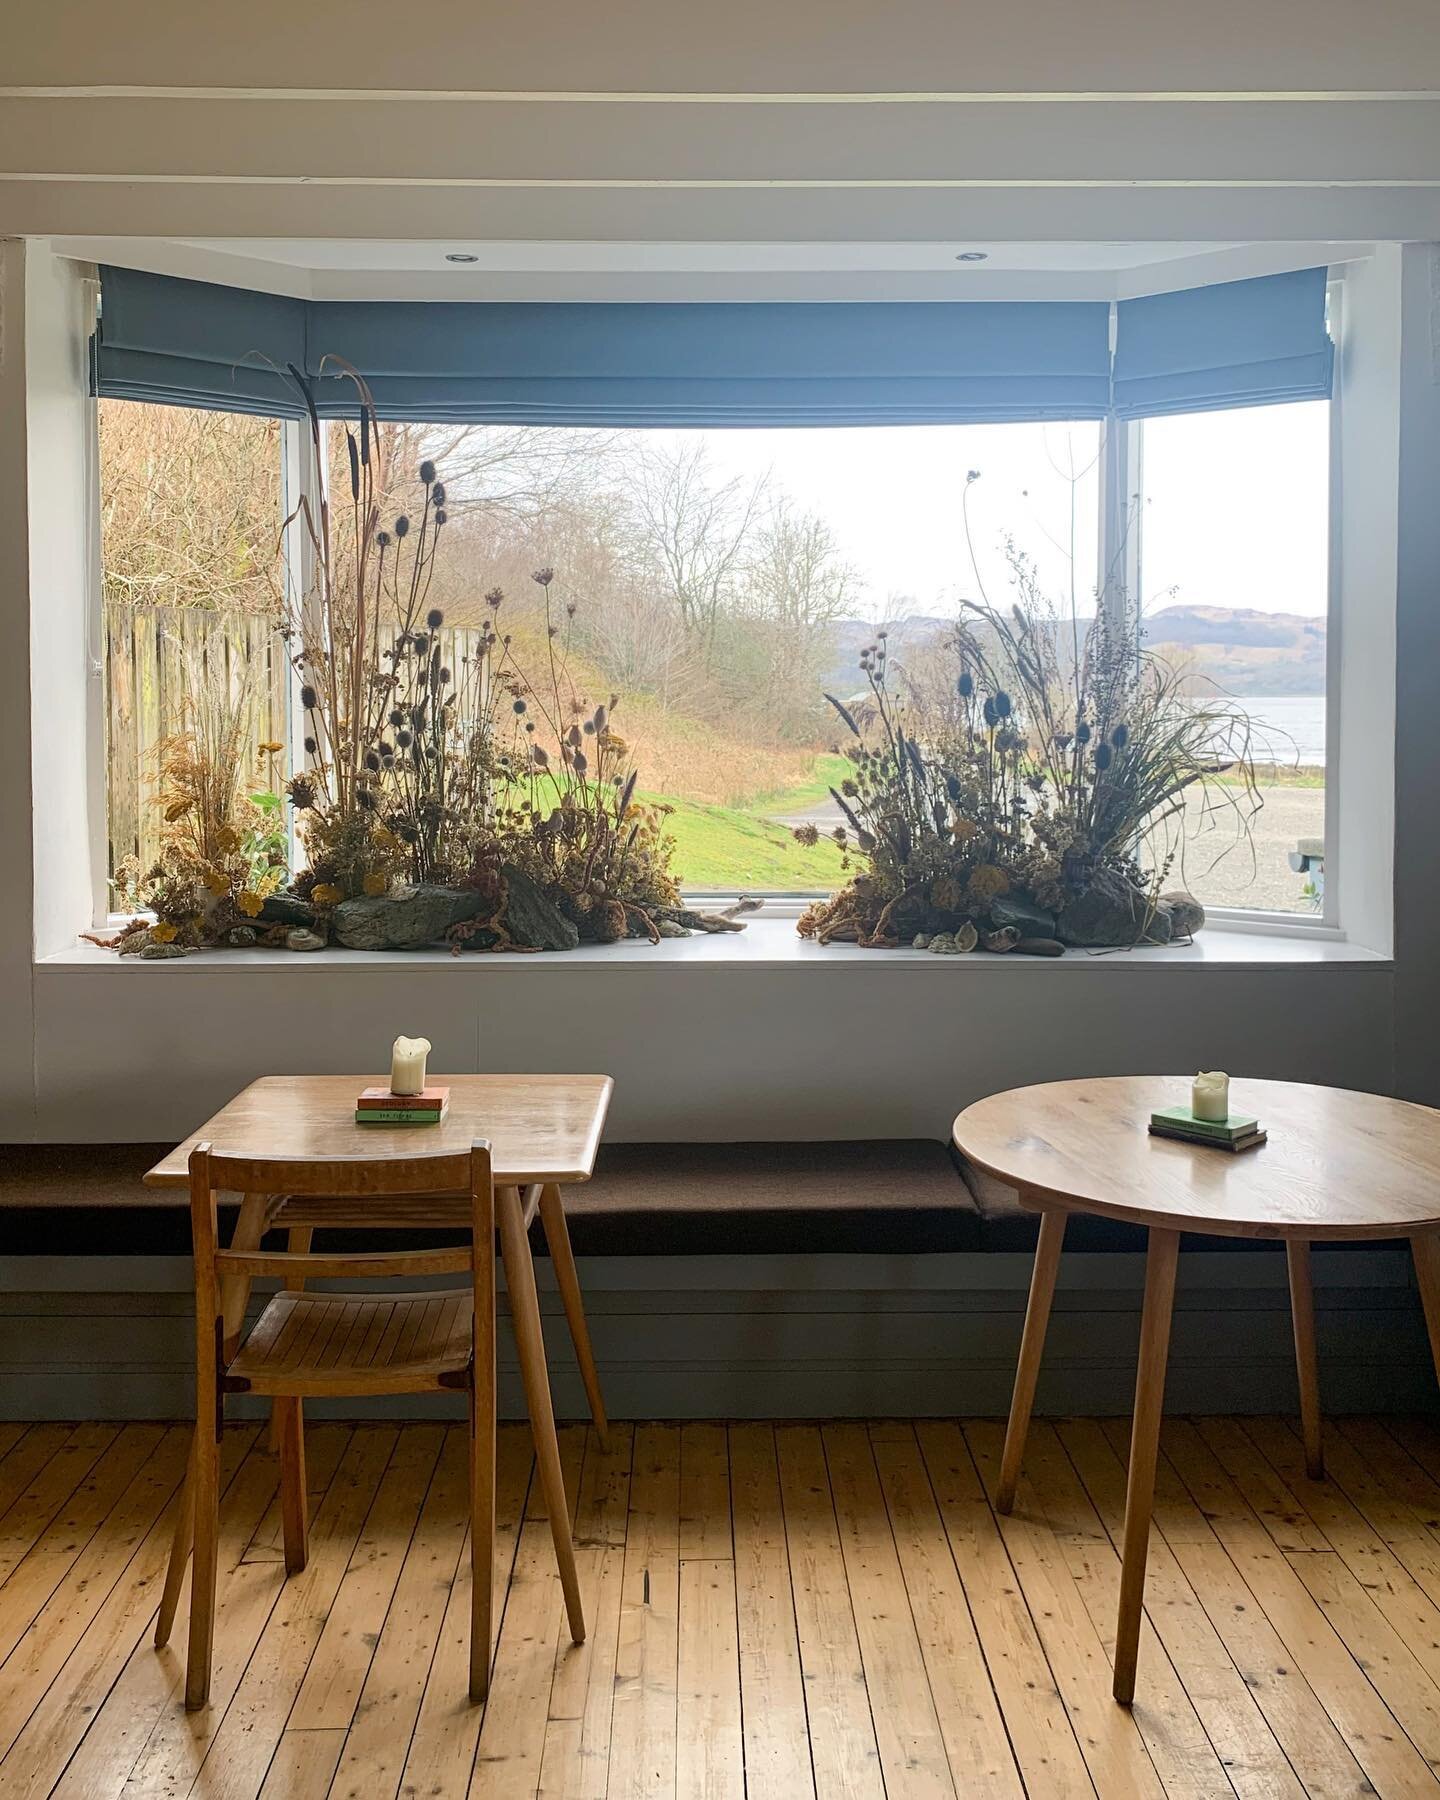 Installations for Inver part 2 and the closest I&rsquo;ll ever come to kissing a fish&hellip;. 🐟 
The view from this bay window in the restaurant is a meeting point of ever changing landscape - of translucent layered sky, of light play on the minera